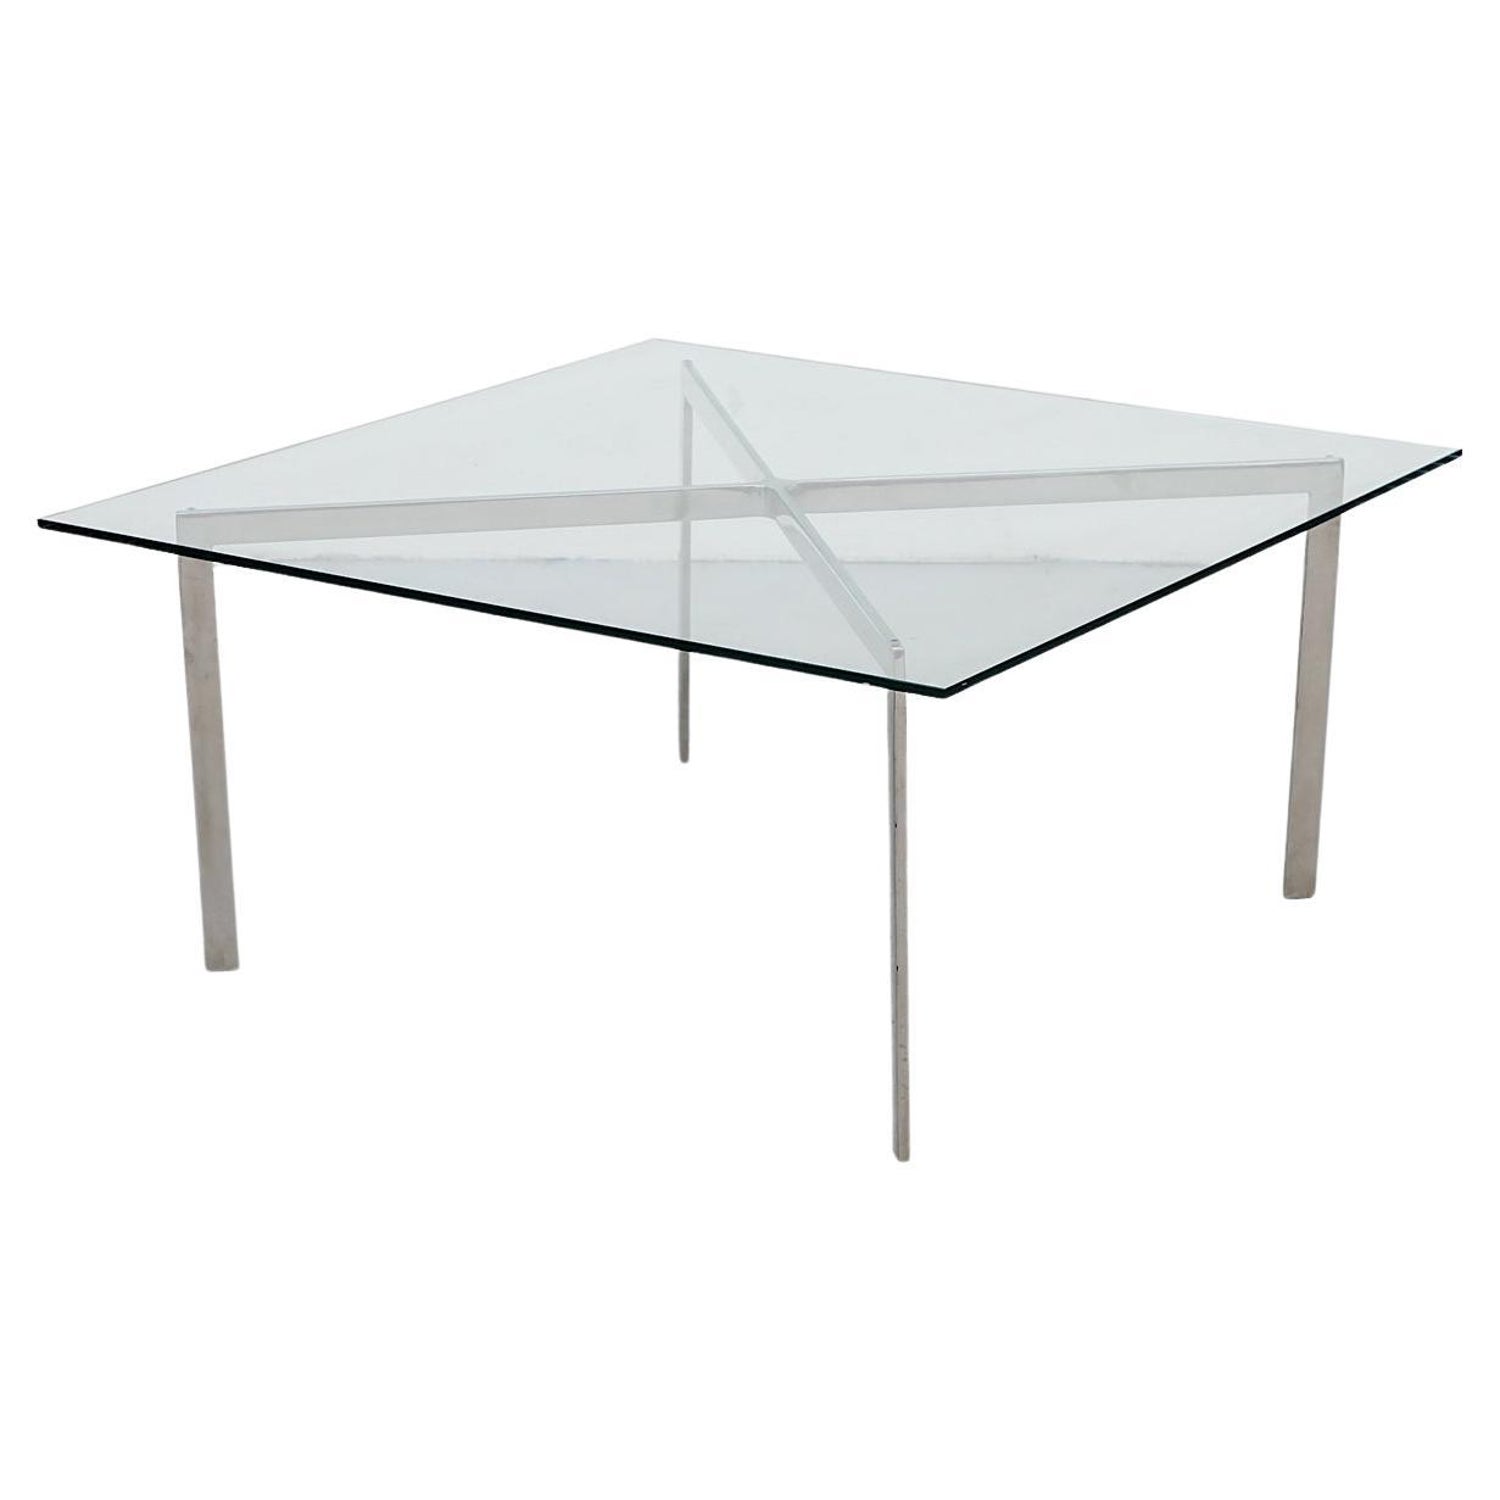 Rare Pre Knoll Production Barcelona Coffee Table by Mies van der Rohe, 1955  For Sale at 1stDibs | mies van der rohe barcelona table, mies coffee table,  knoll barcelona table